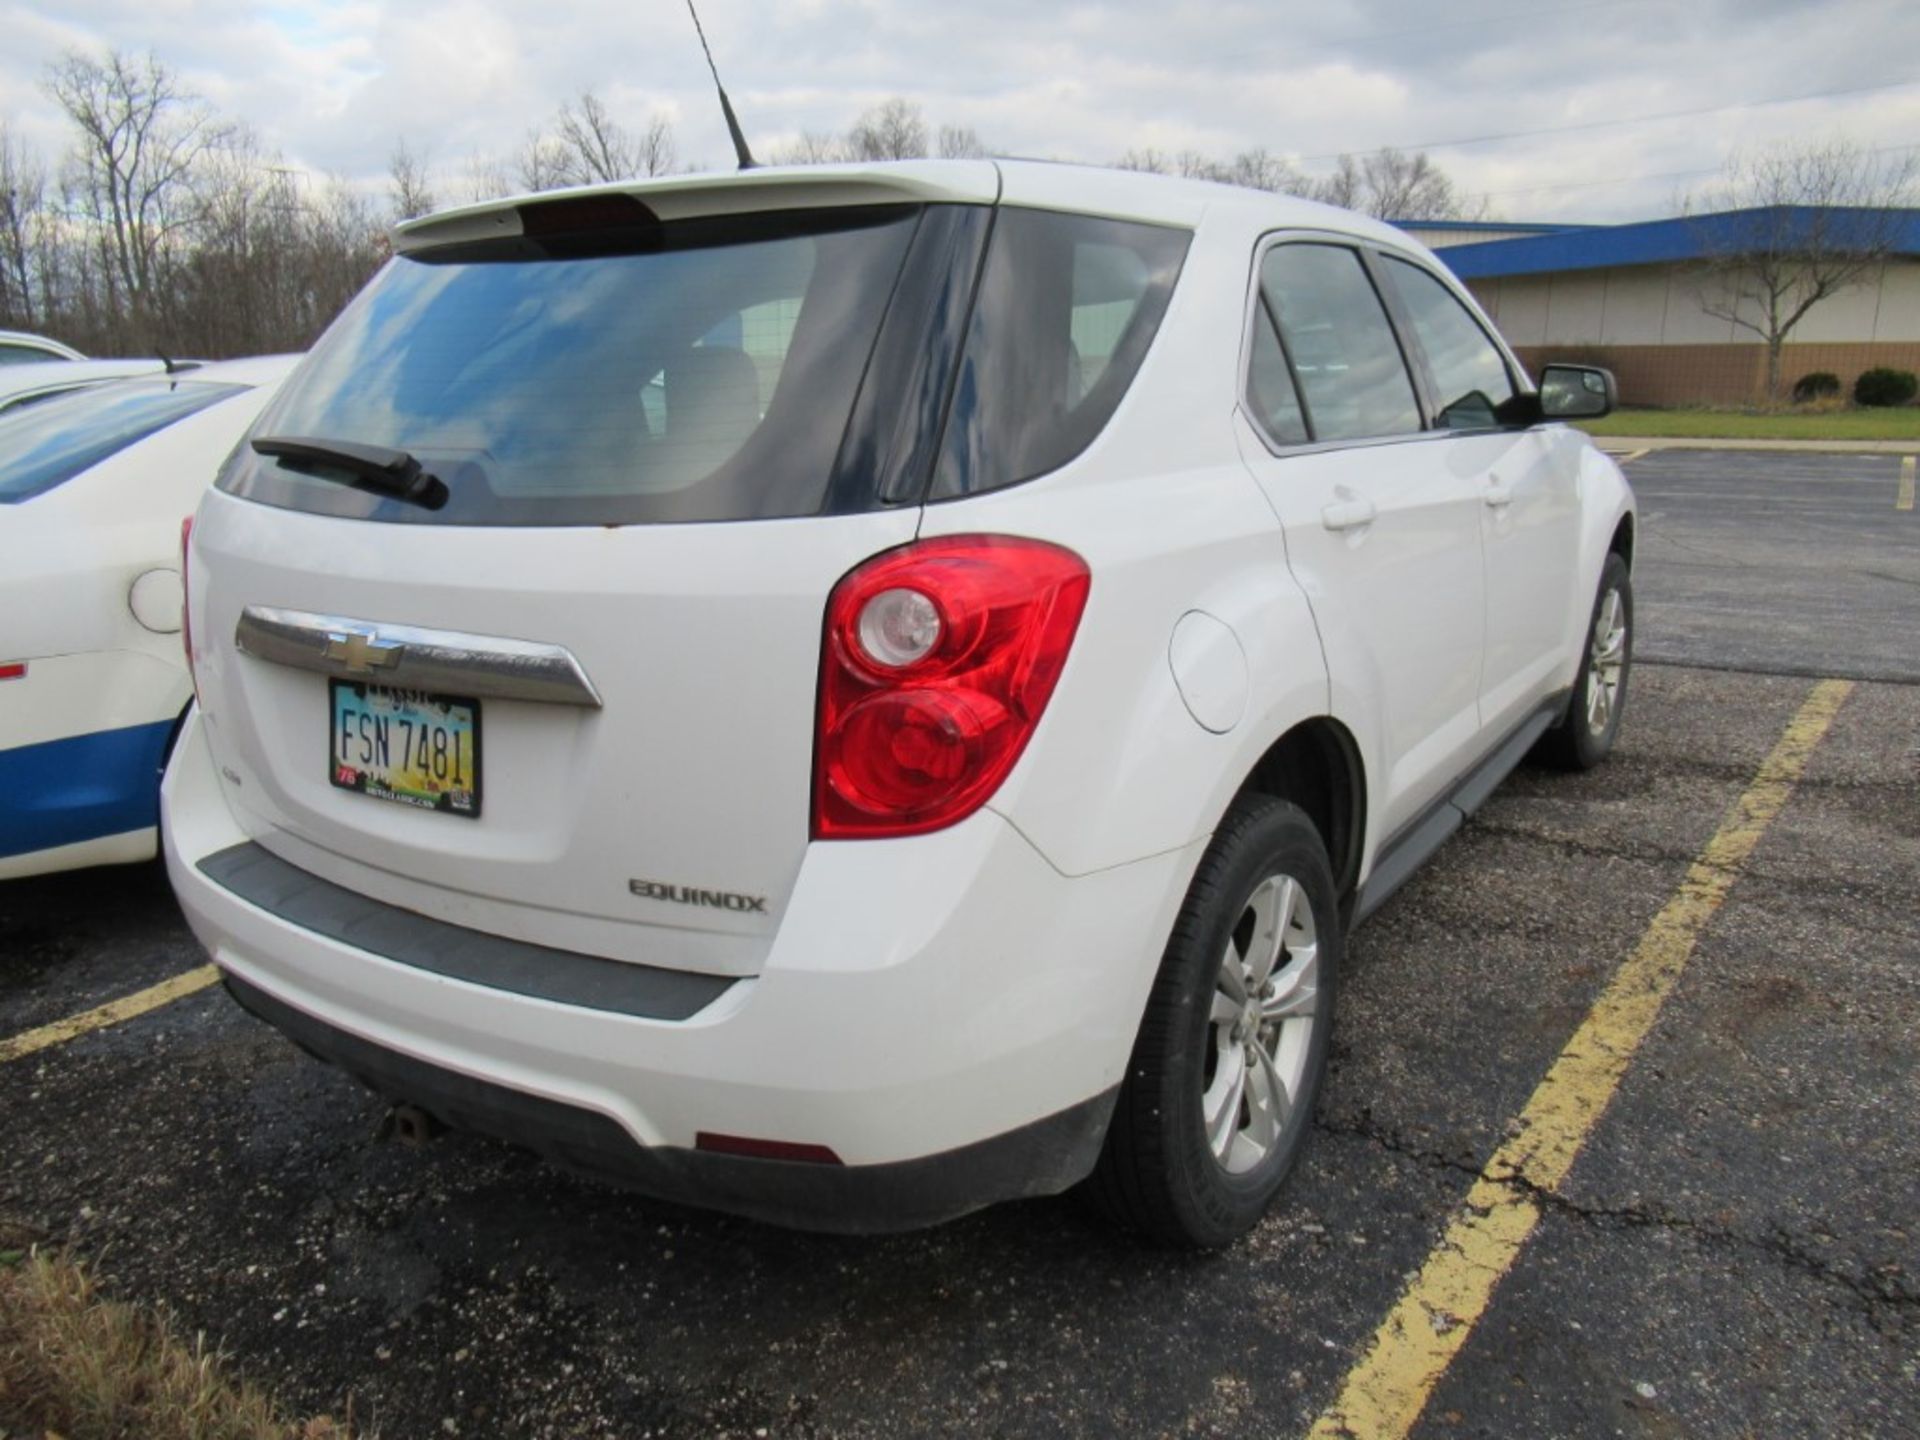 2013 Chevrolet Equinox SUV, VIN 2GNFLCEK2D6152539, Automatic, Cruise Control, AC, PW, PL, PS, AM/FM, - Image 6 of 26